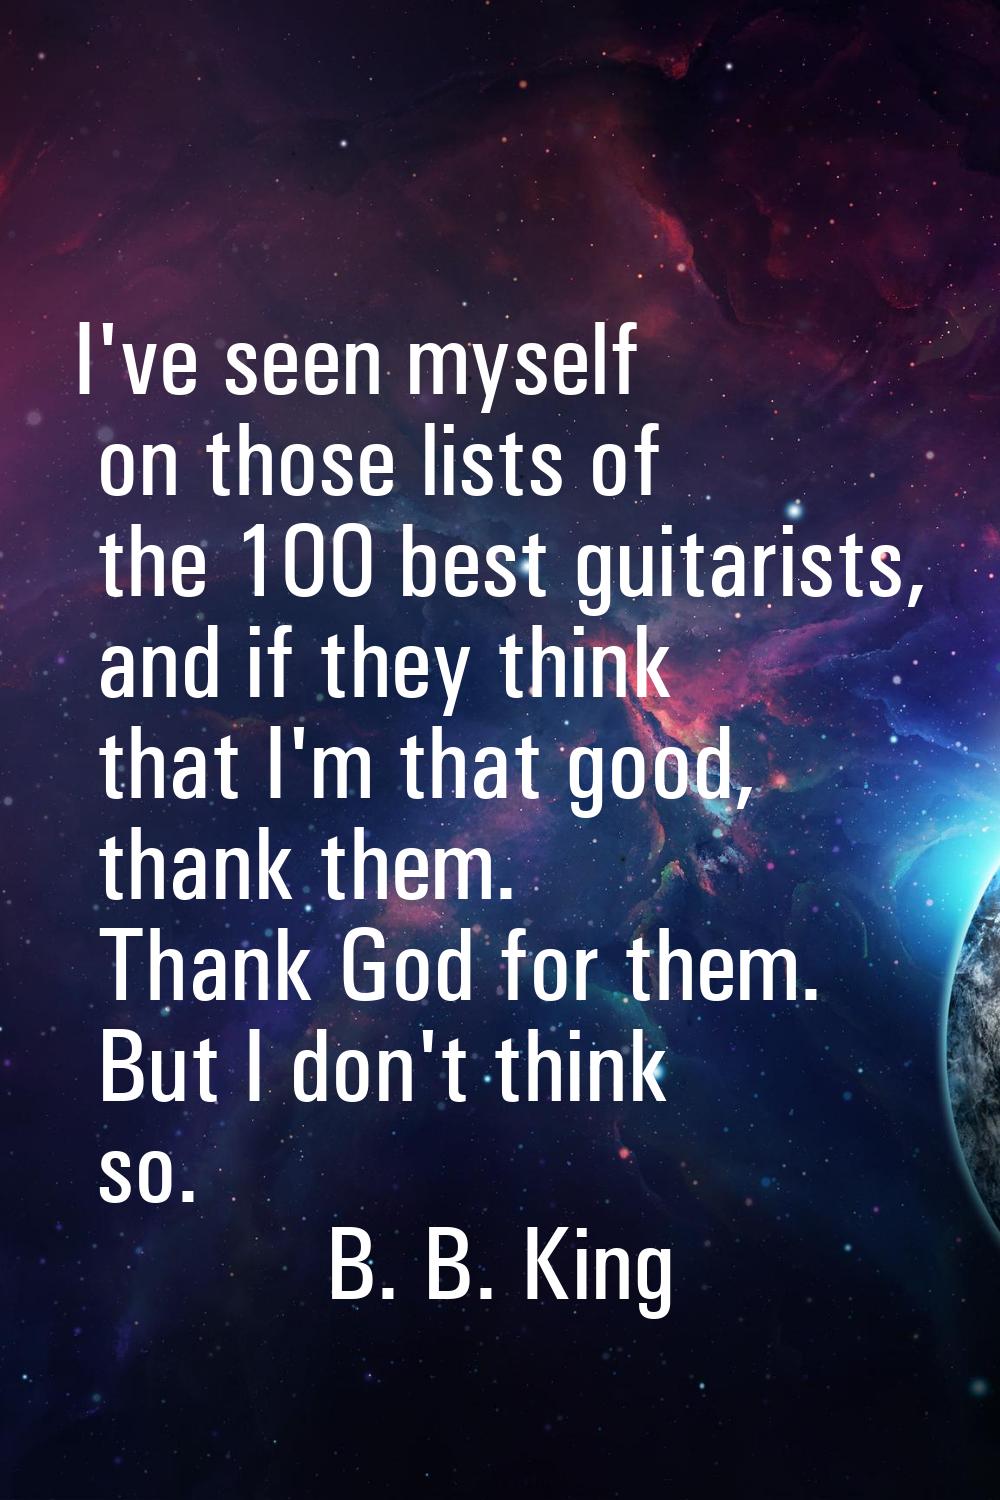 I've seen myself on those lists of the 100 best guitarists, and if they think that I'm that good, t